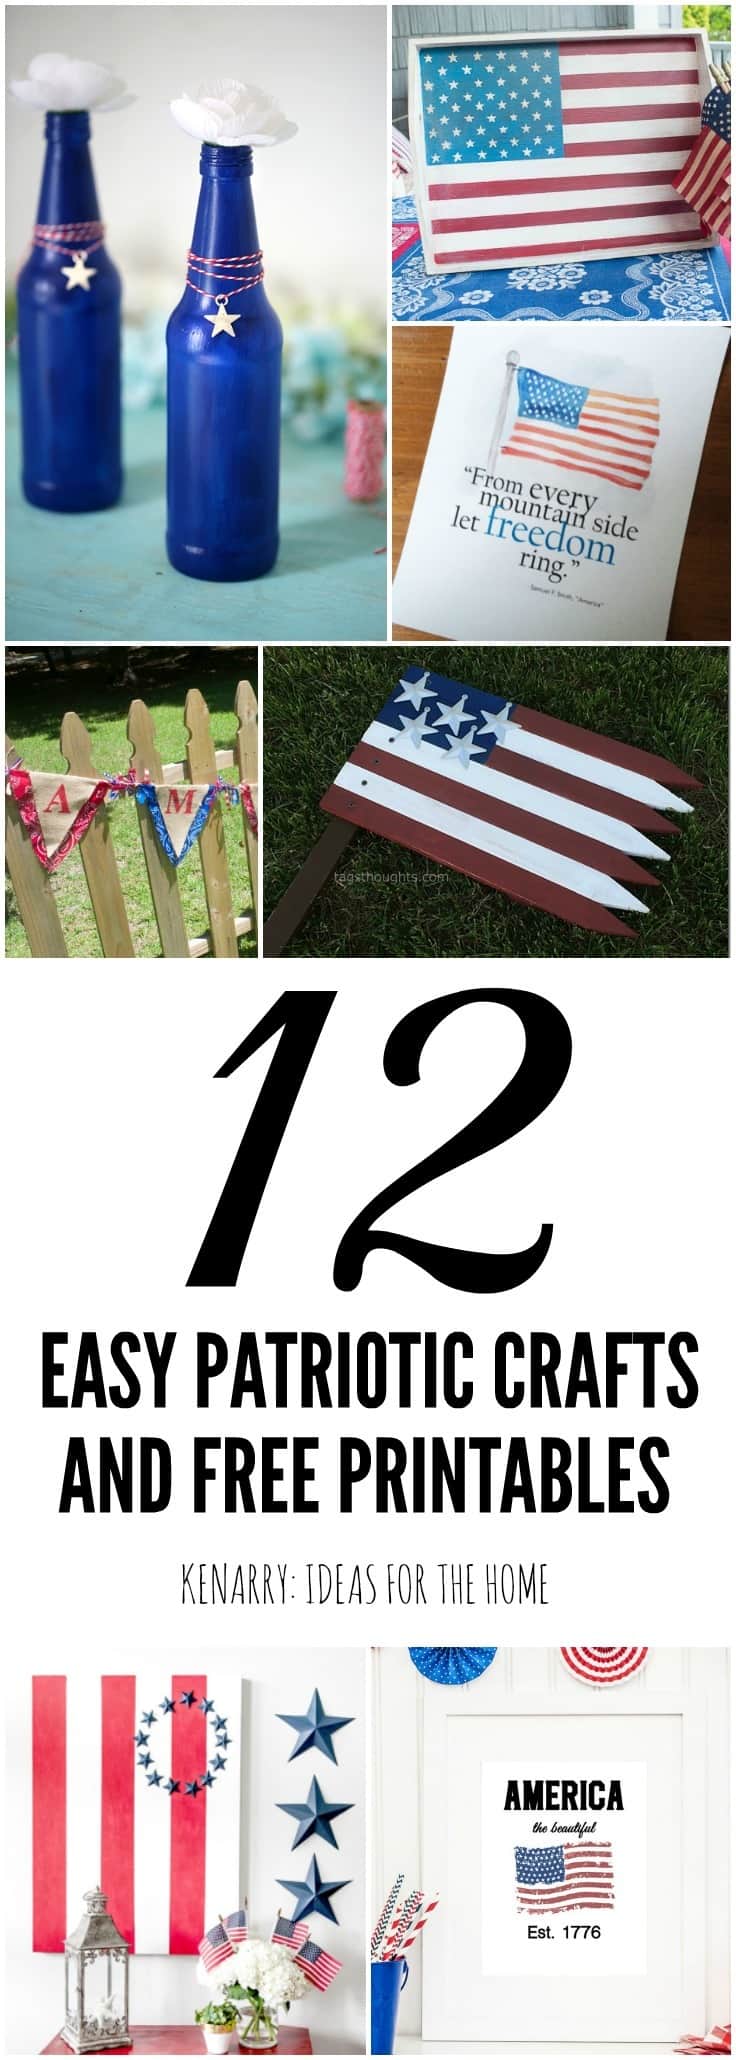 These 12 patriotic decor ideas are perfect for 4th of July or as home decor for Memorial Day, Labor Day and Veteran's Day too! These easy crafts and free printables will help you quickly turn your home into a star-spangled sensation!